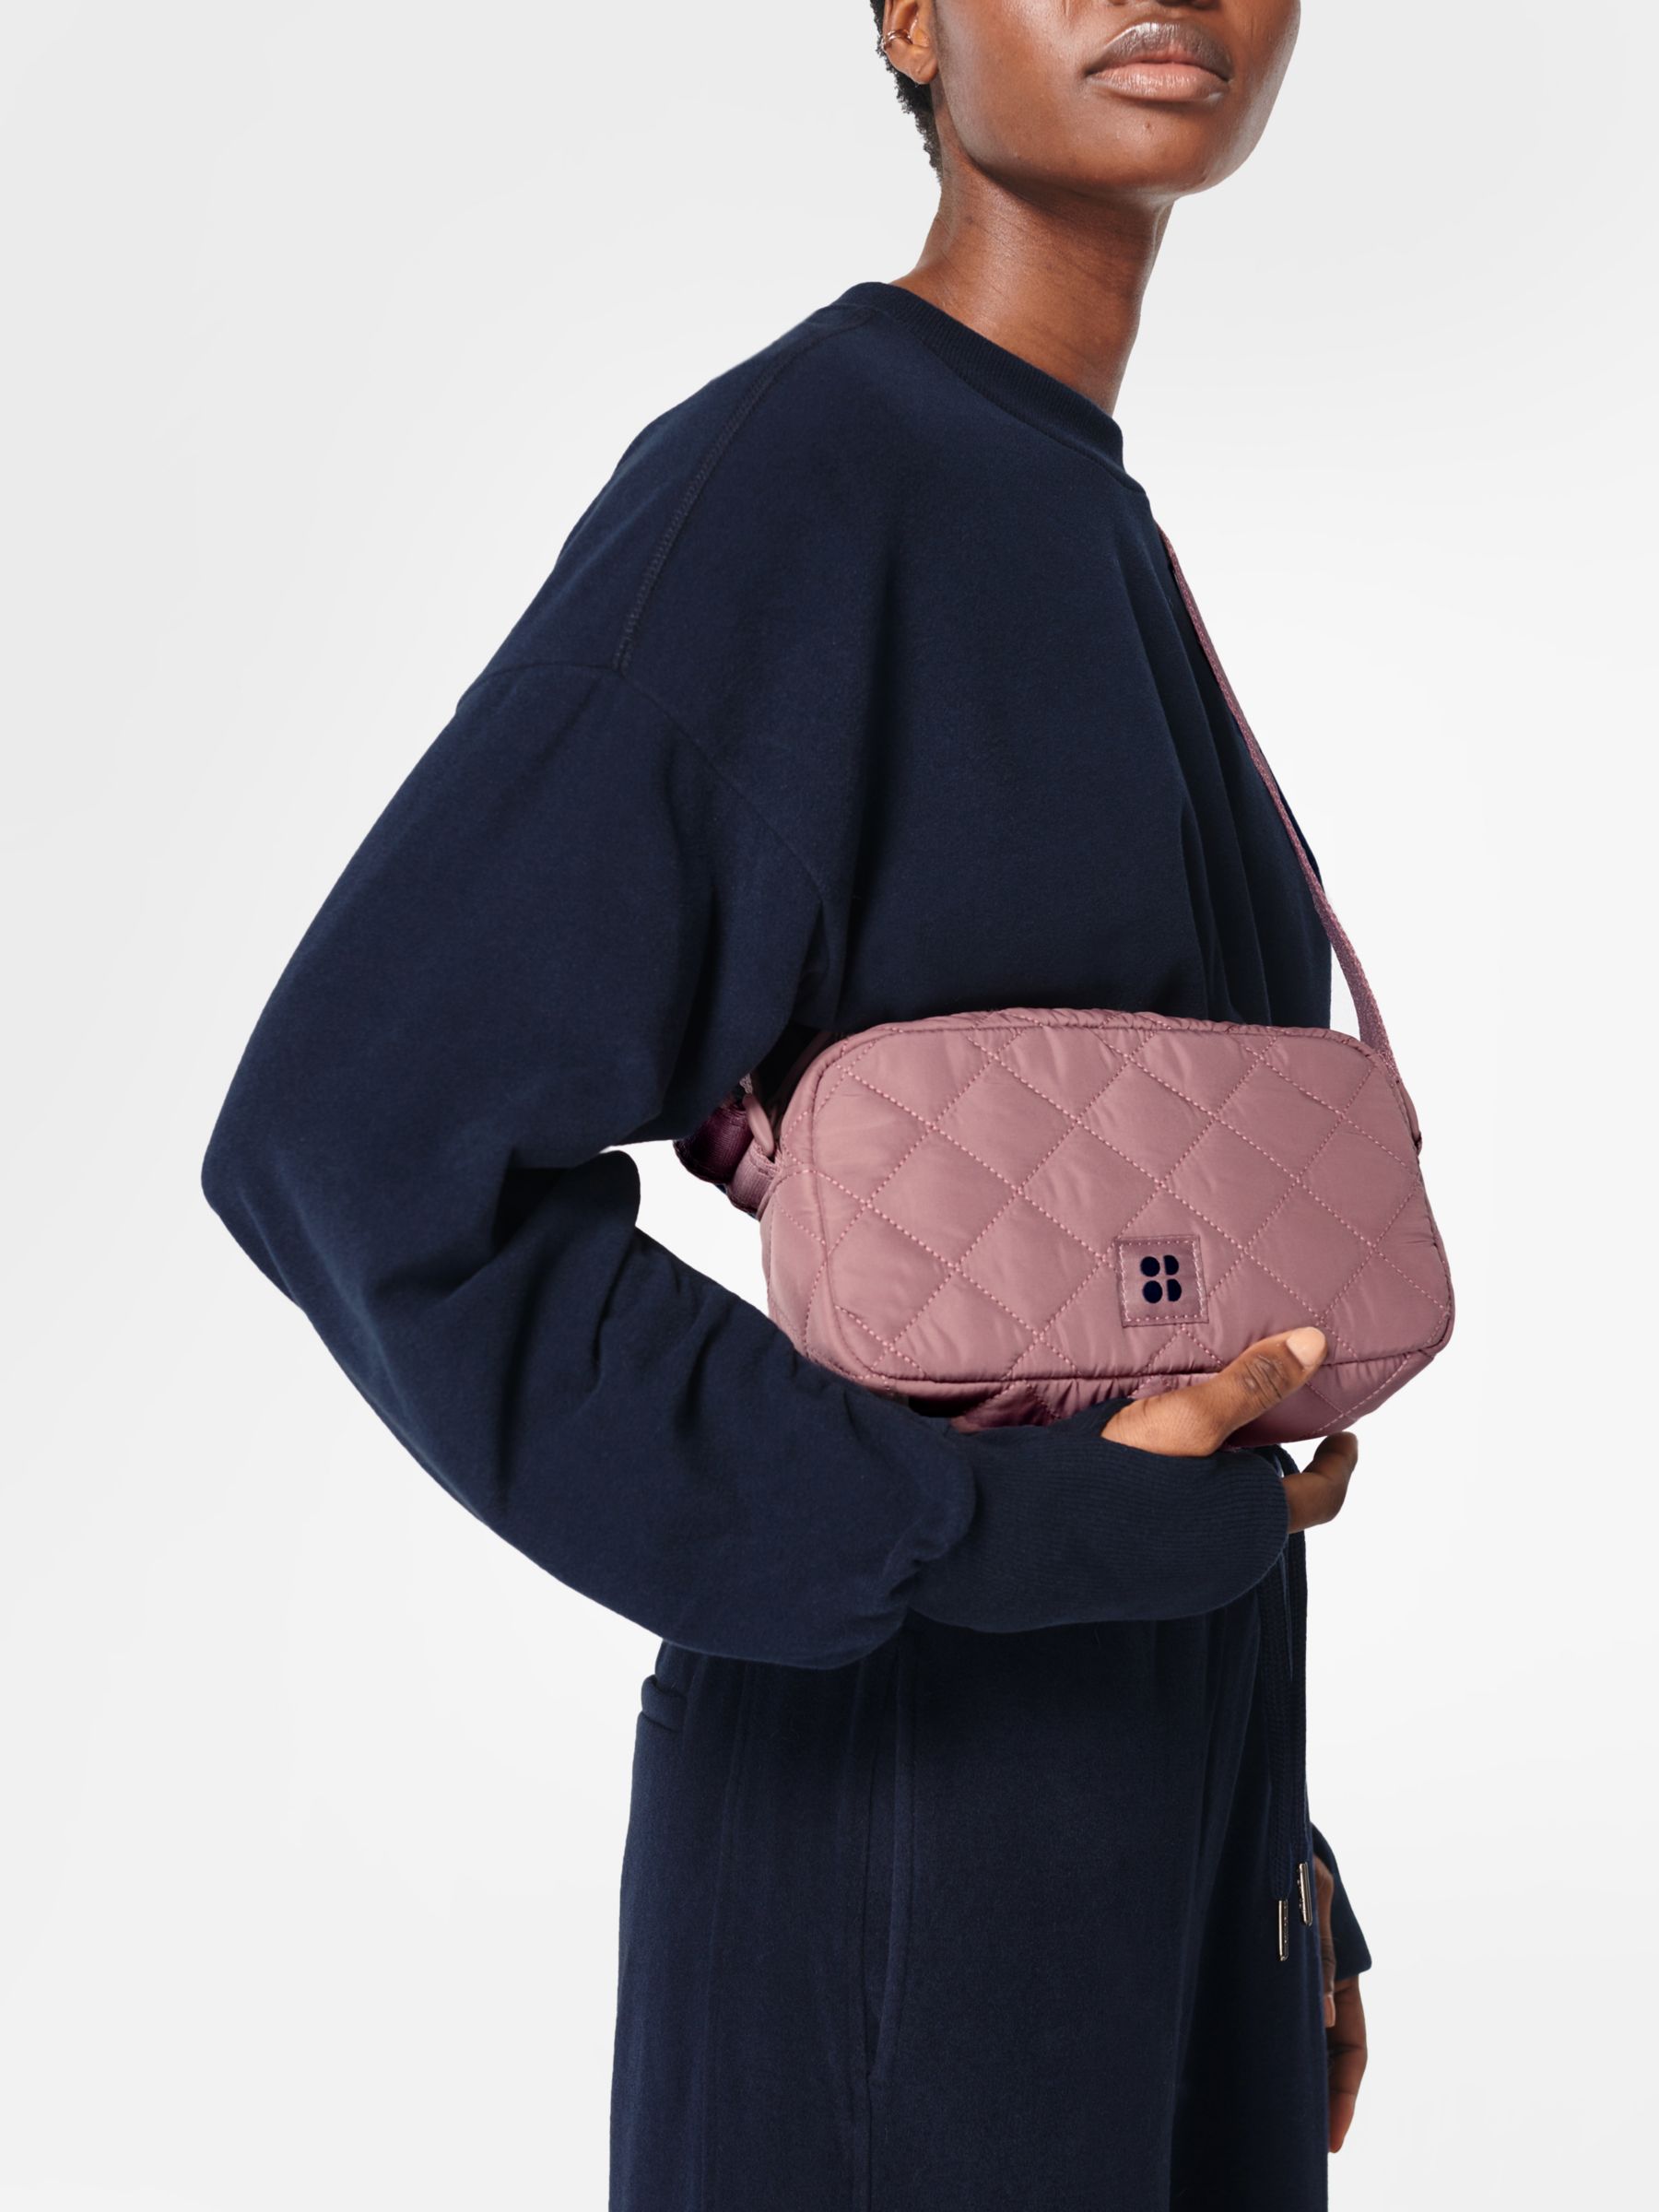 Sweaty Betty All-Day Quilted Bag, Wisteria Purple